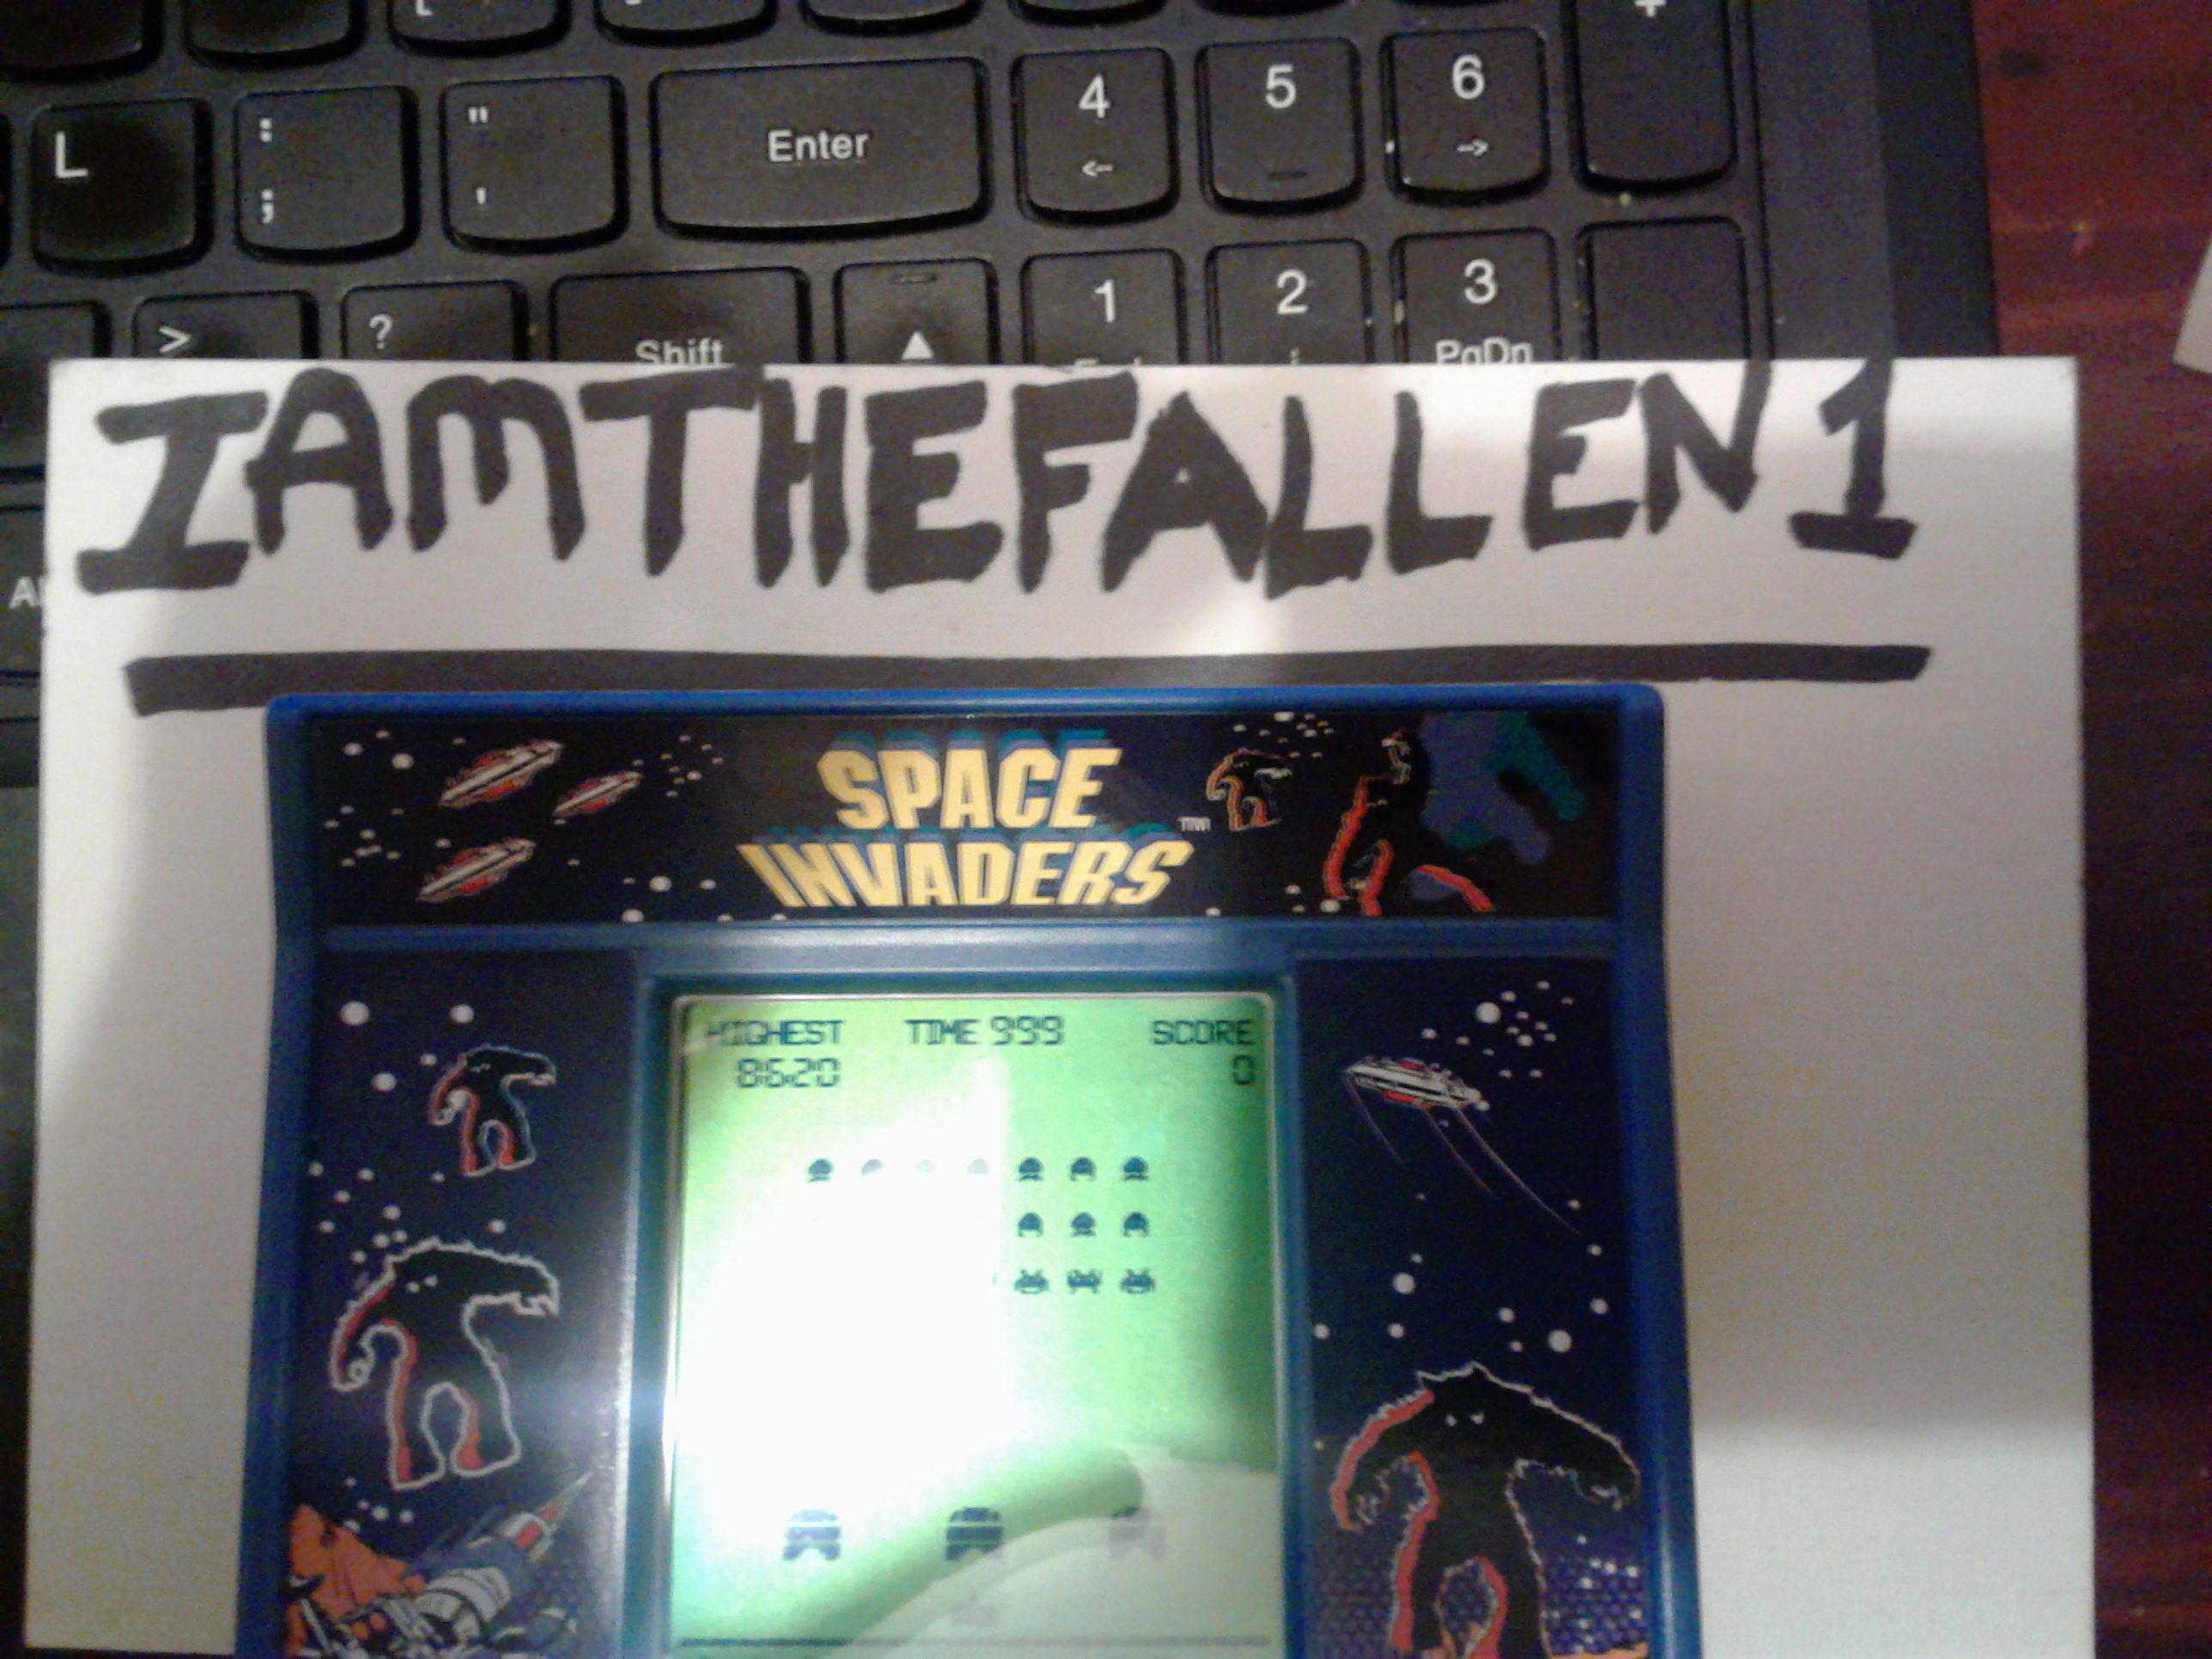 iamthefallen1: Arcade Classics 02: Space Invaders (Dedicated Handheld) 8,620 points on 2017-09-02 17:40:19